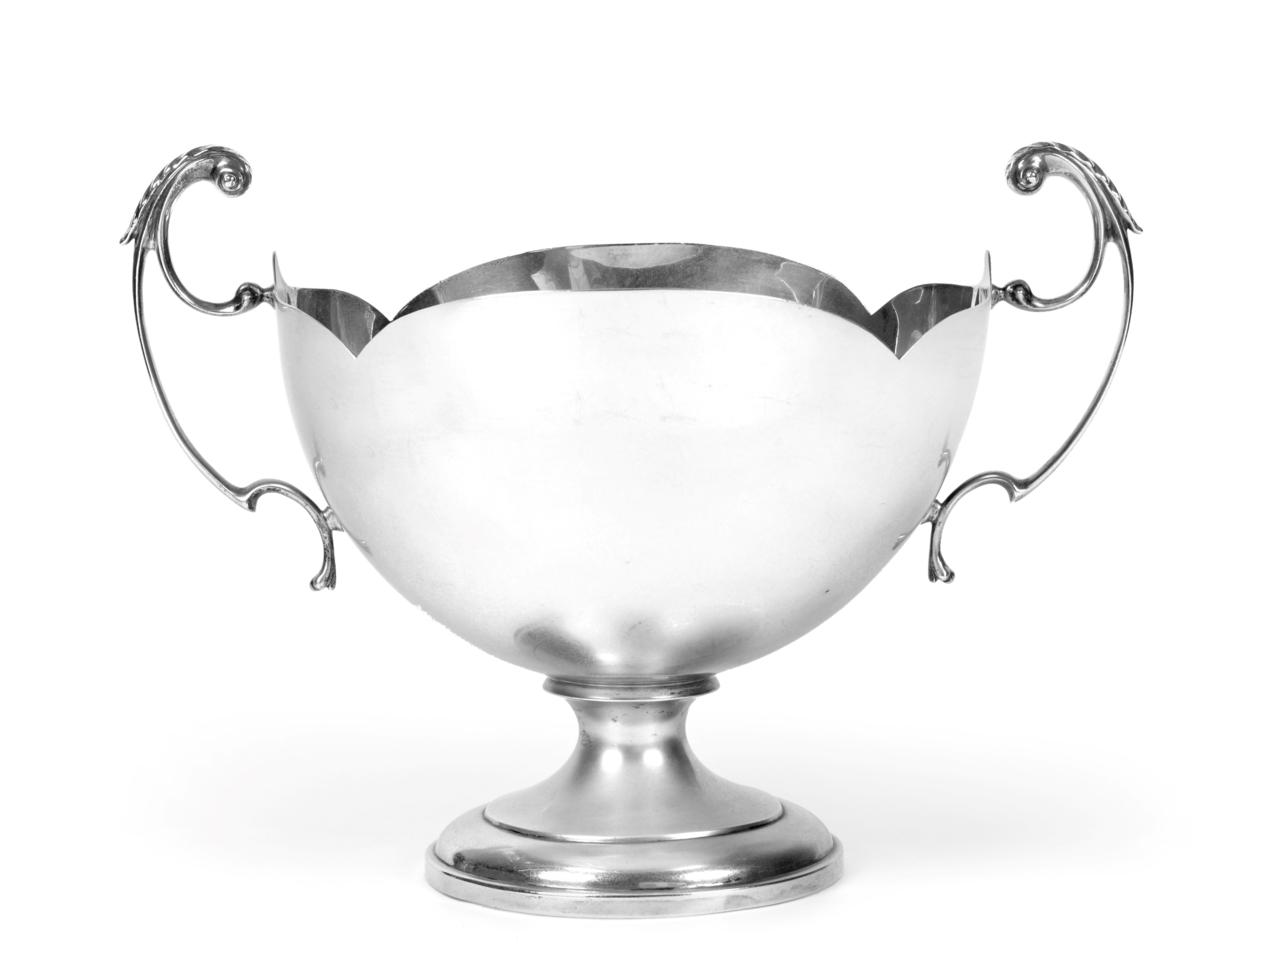 Lot 153 - A George V Silver Punch-Bowl, by Walker and Hall, Sheffield, 1916, tapering and with shaped rim, on